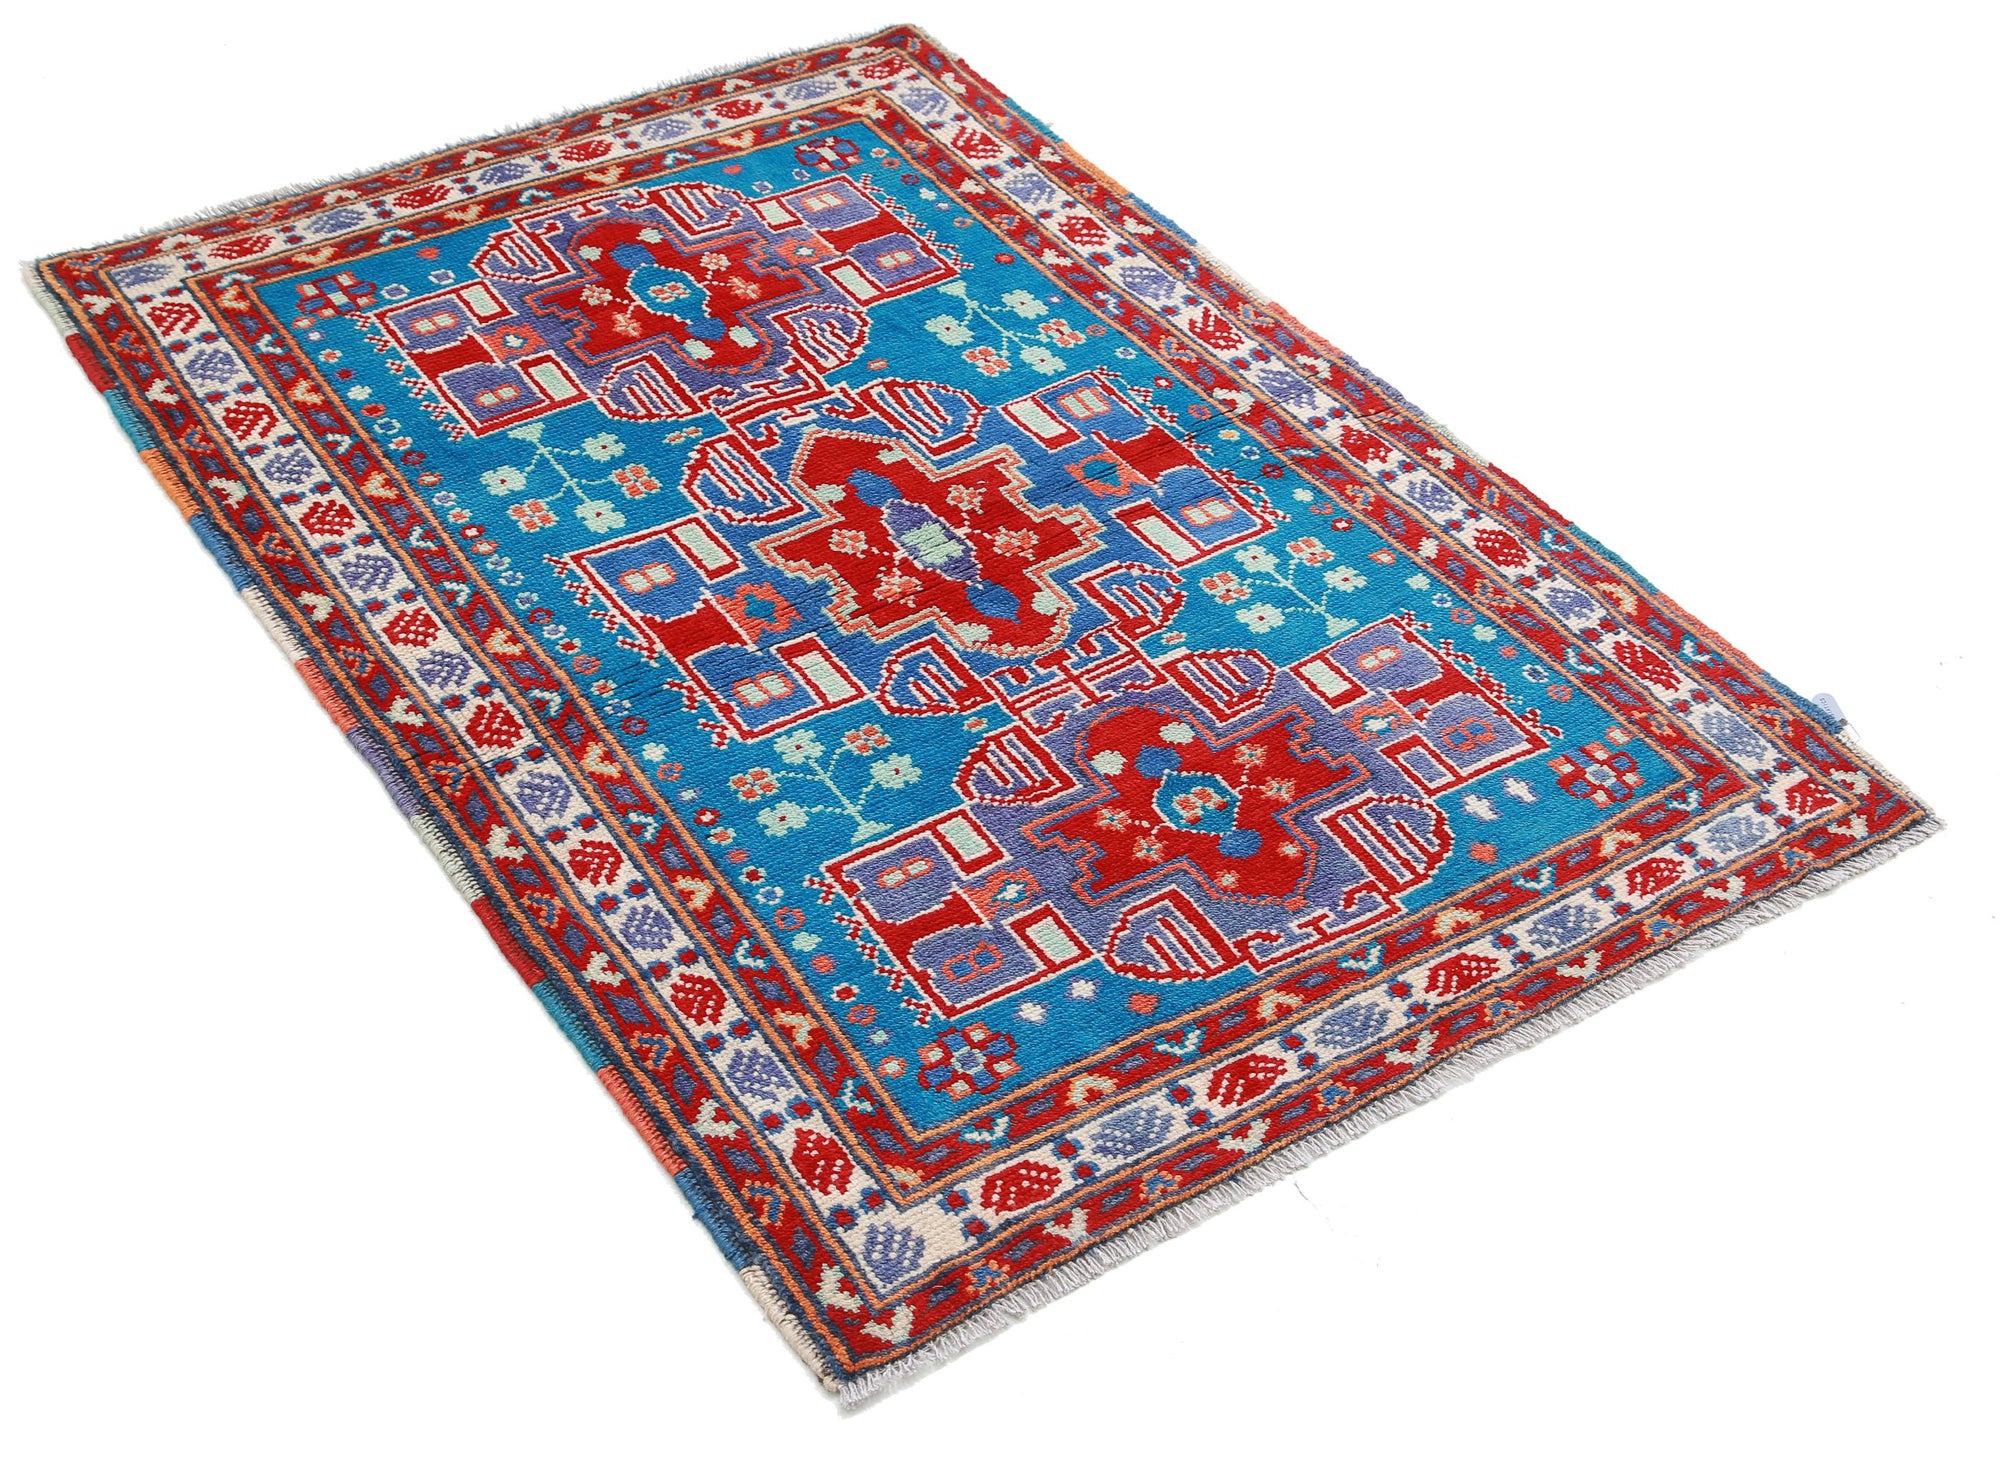 Revival-hand-knotted-qarghani-wool-rug-5014065-1.jpg